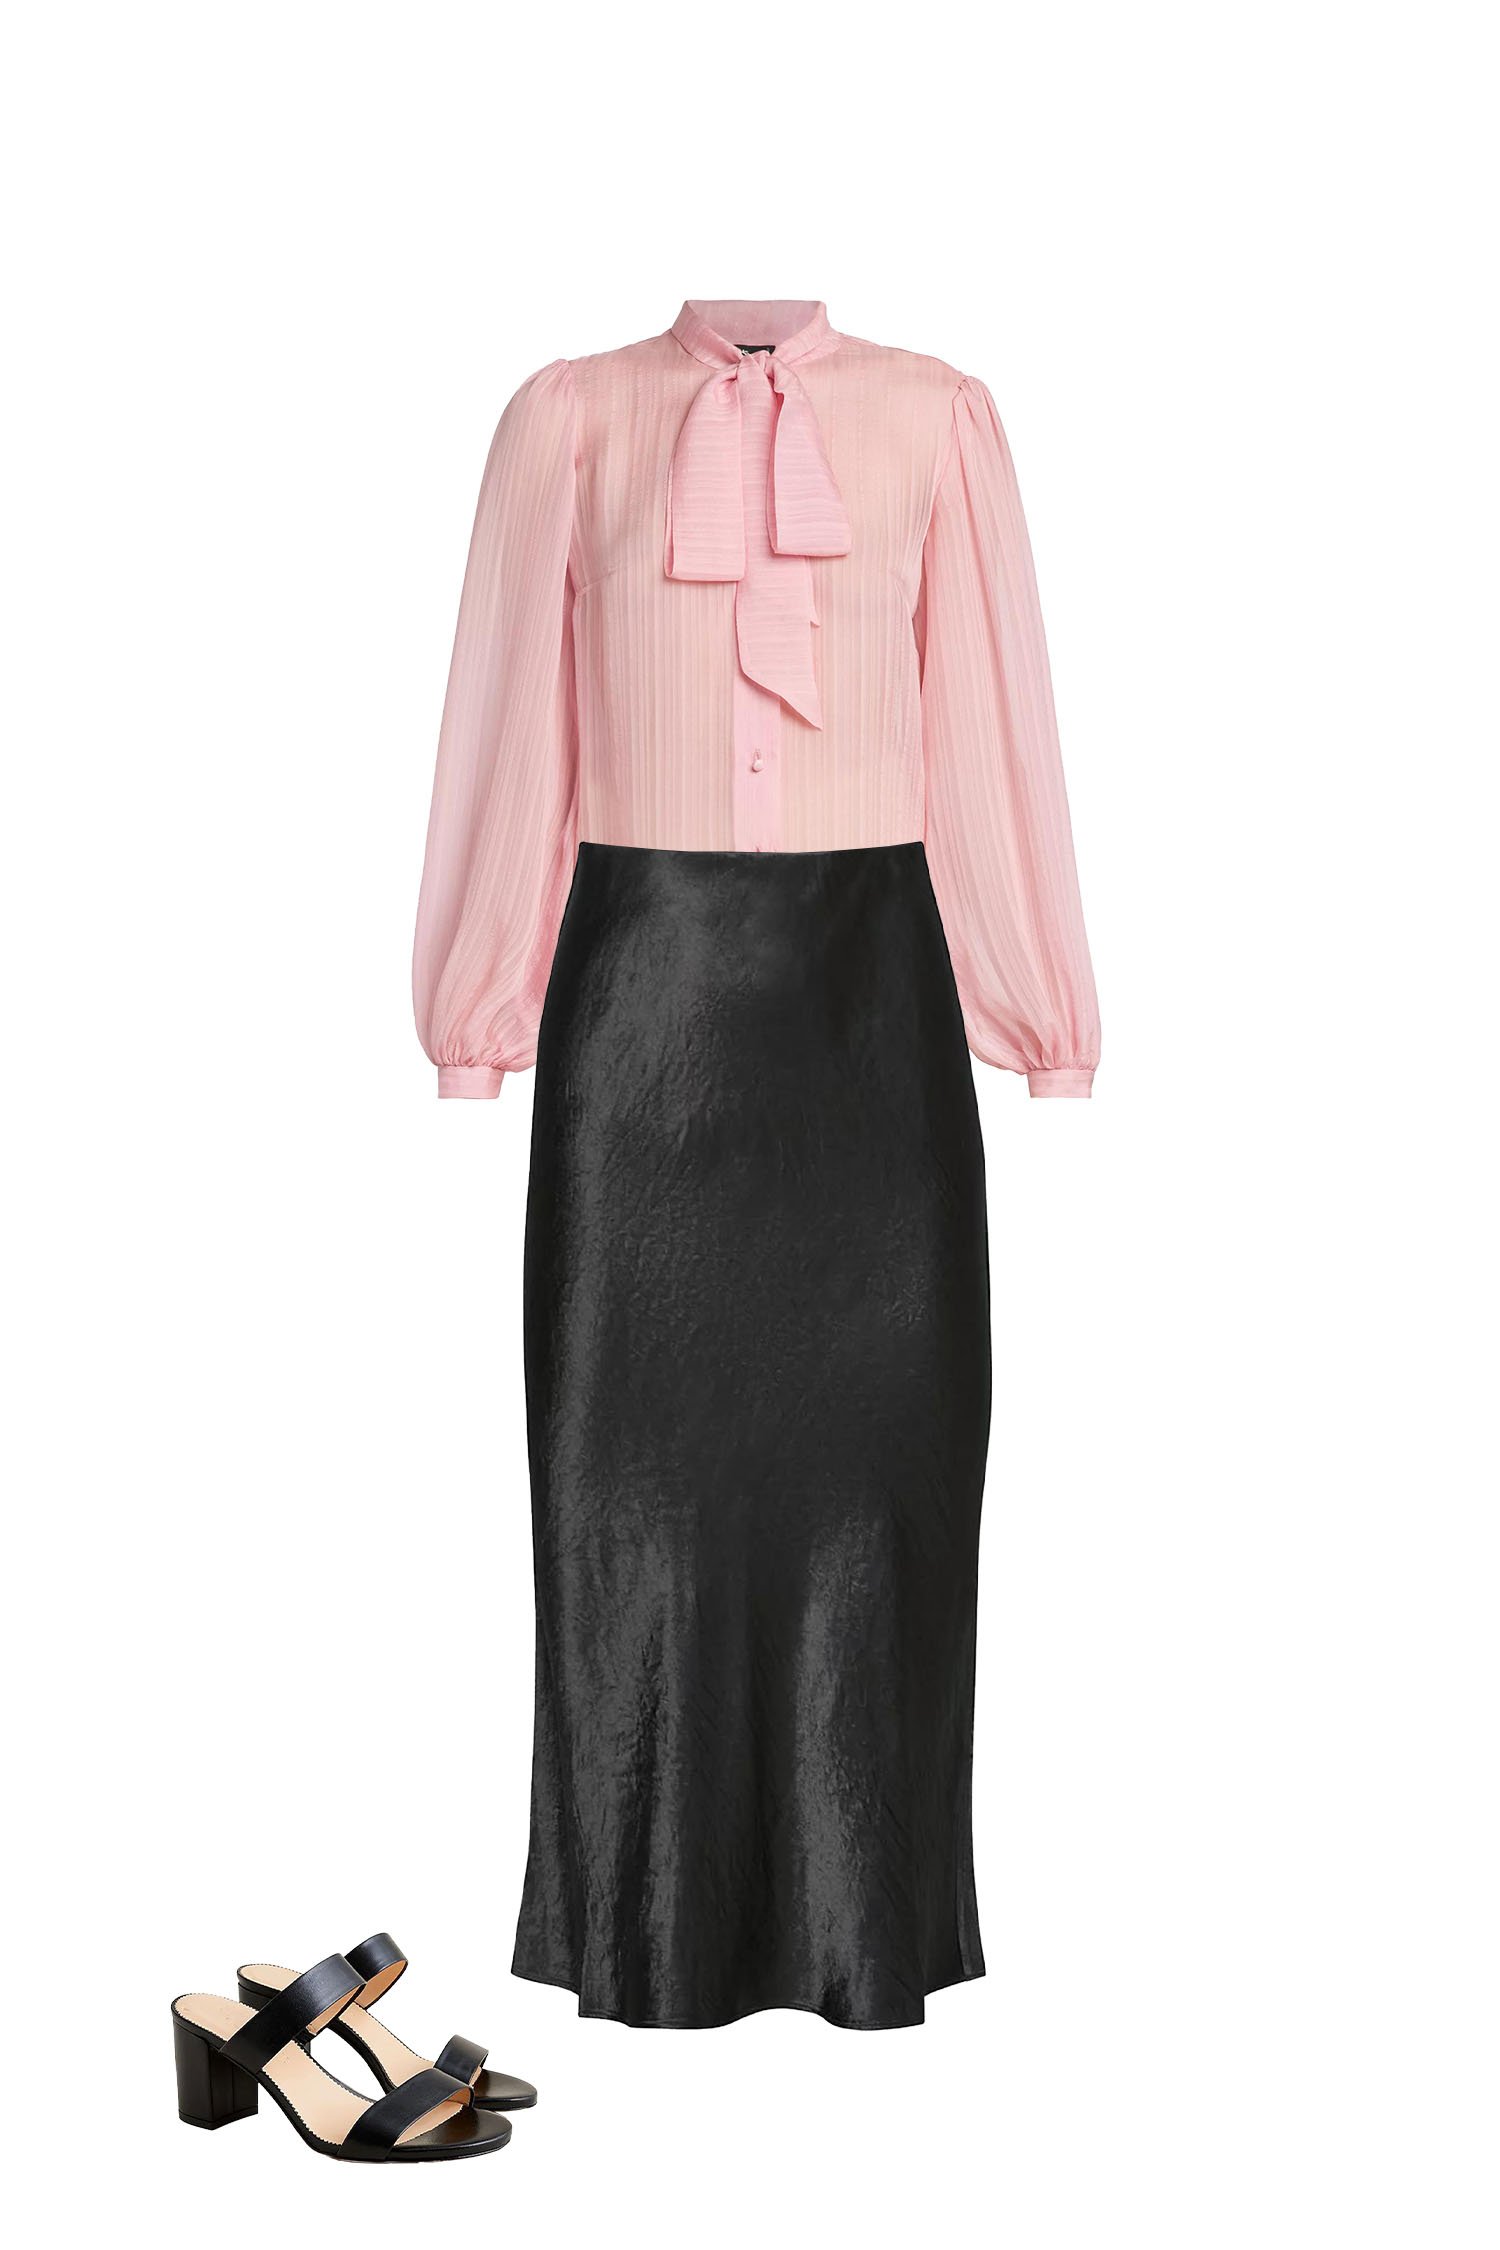 Black Satin Skirt Outfit with Pink Pussy Bow Blouse, and Black Heeled Sandals